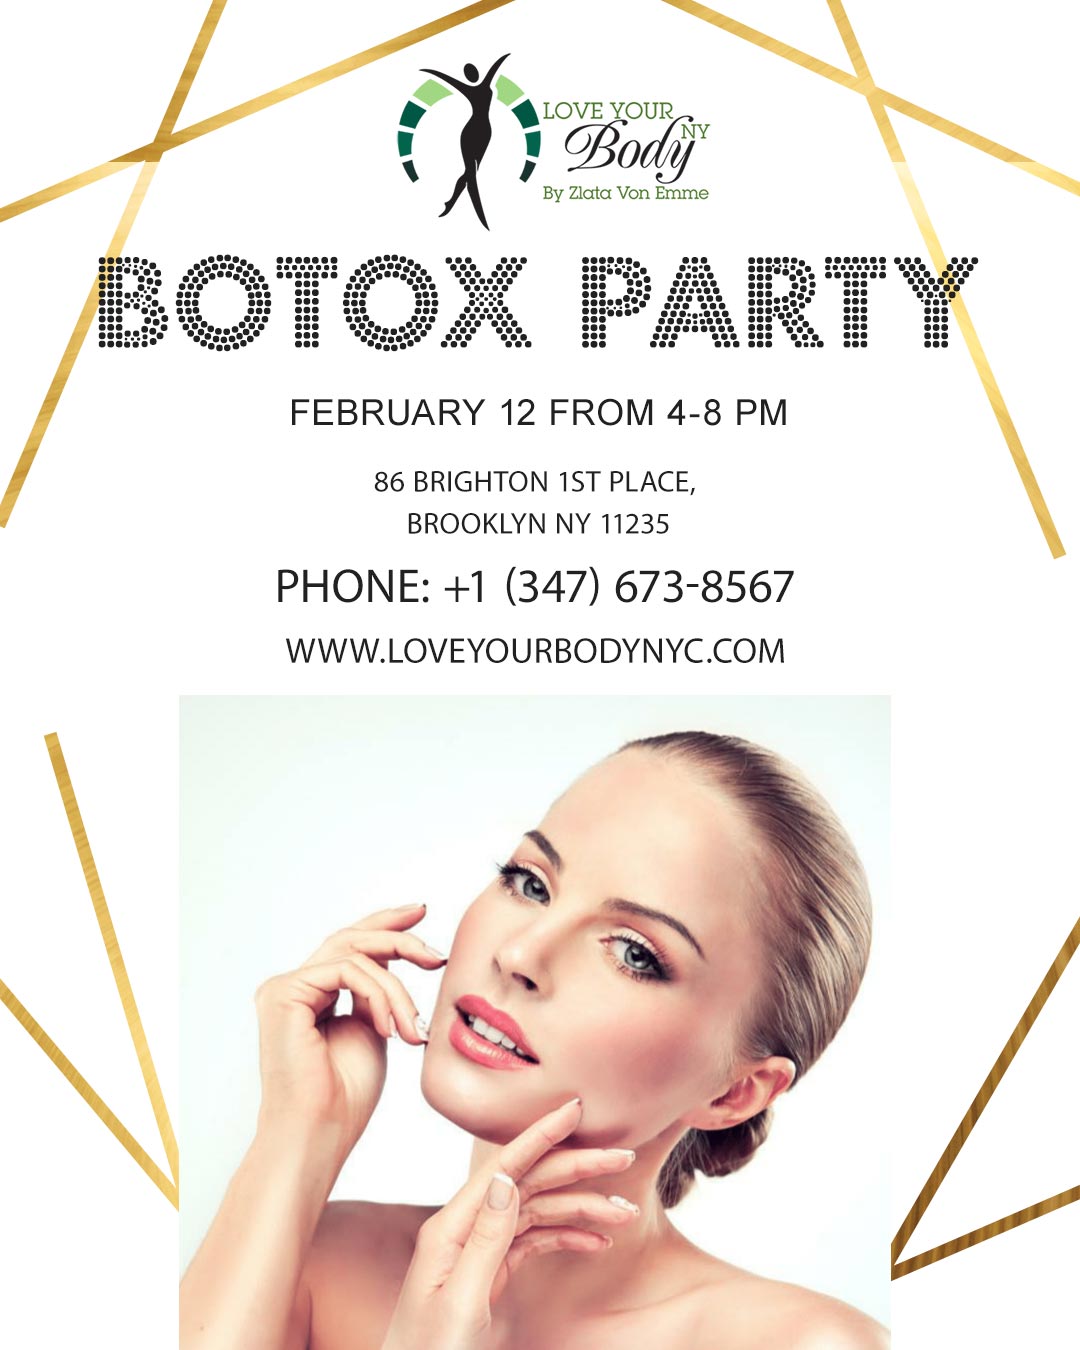 Botox Party Love Your Body NYC